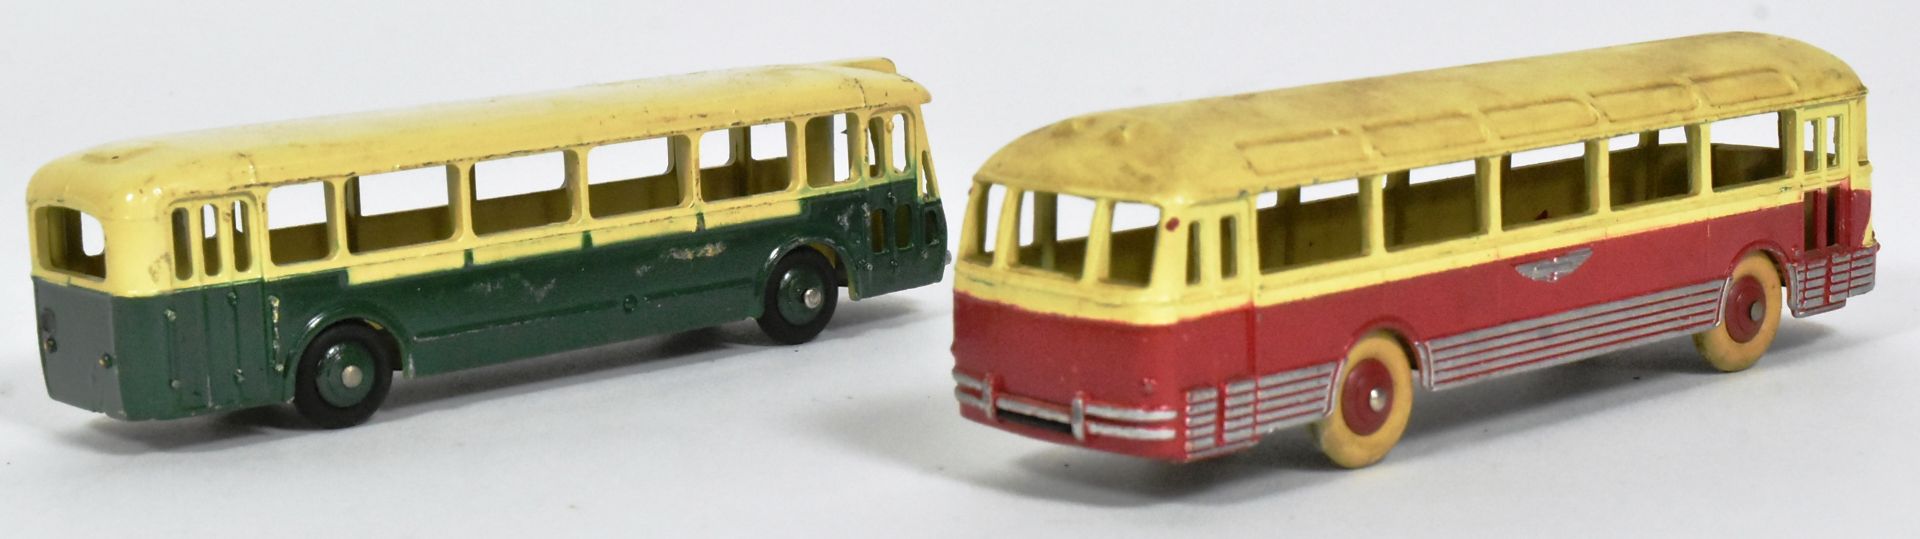 DIECAST - FRENCH DINKY TOYS - CHAUSSON & SOMUA BUSES - Image 4 of 6